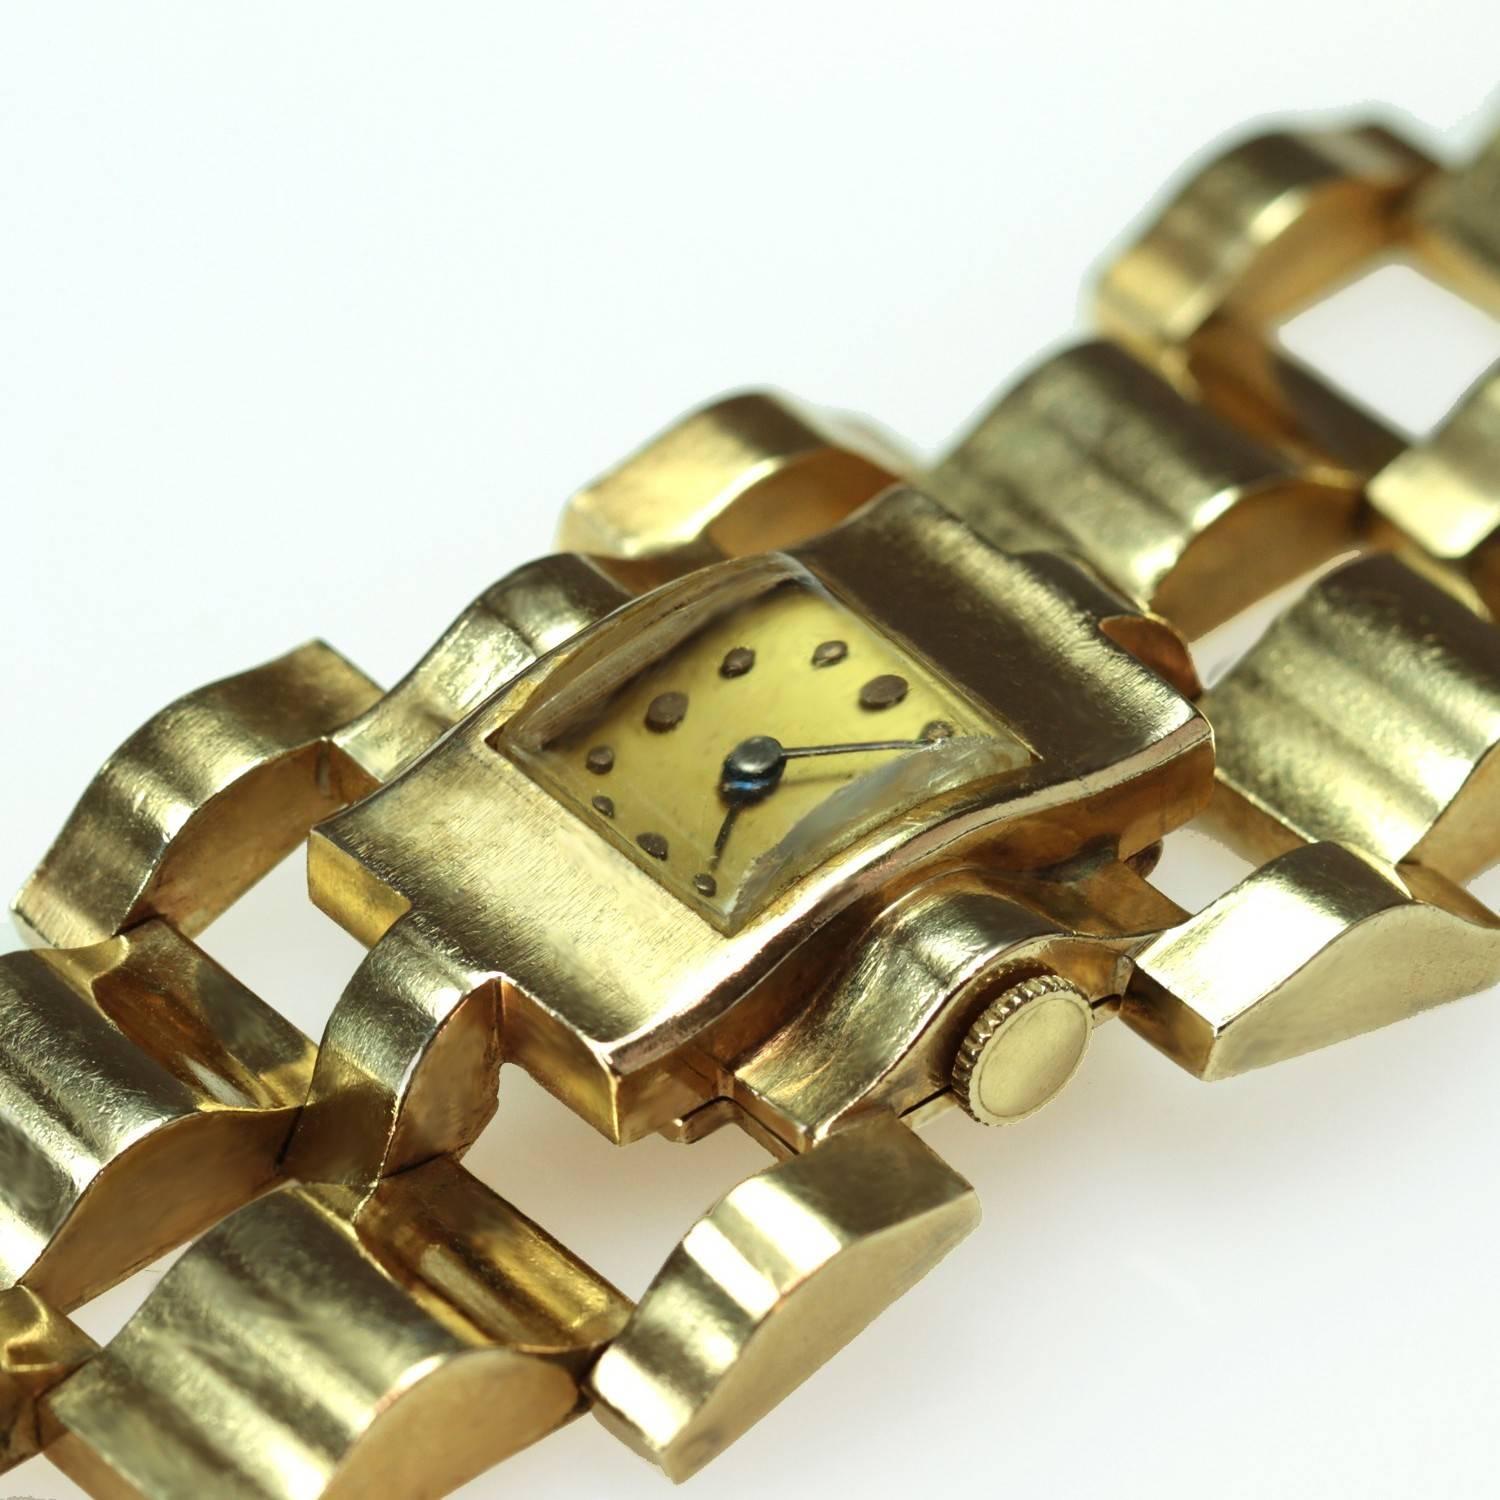 A stylish circa 1940s retro watch made in 14k yellow gold. This women's timepiece features mechanical hand movement, a black dial, and a hidden safety clasp. Measurements: 1.18